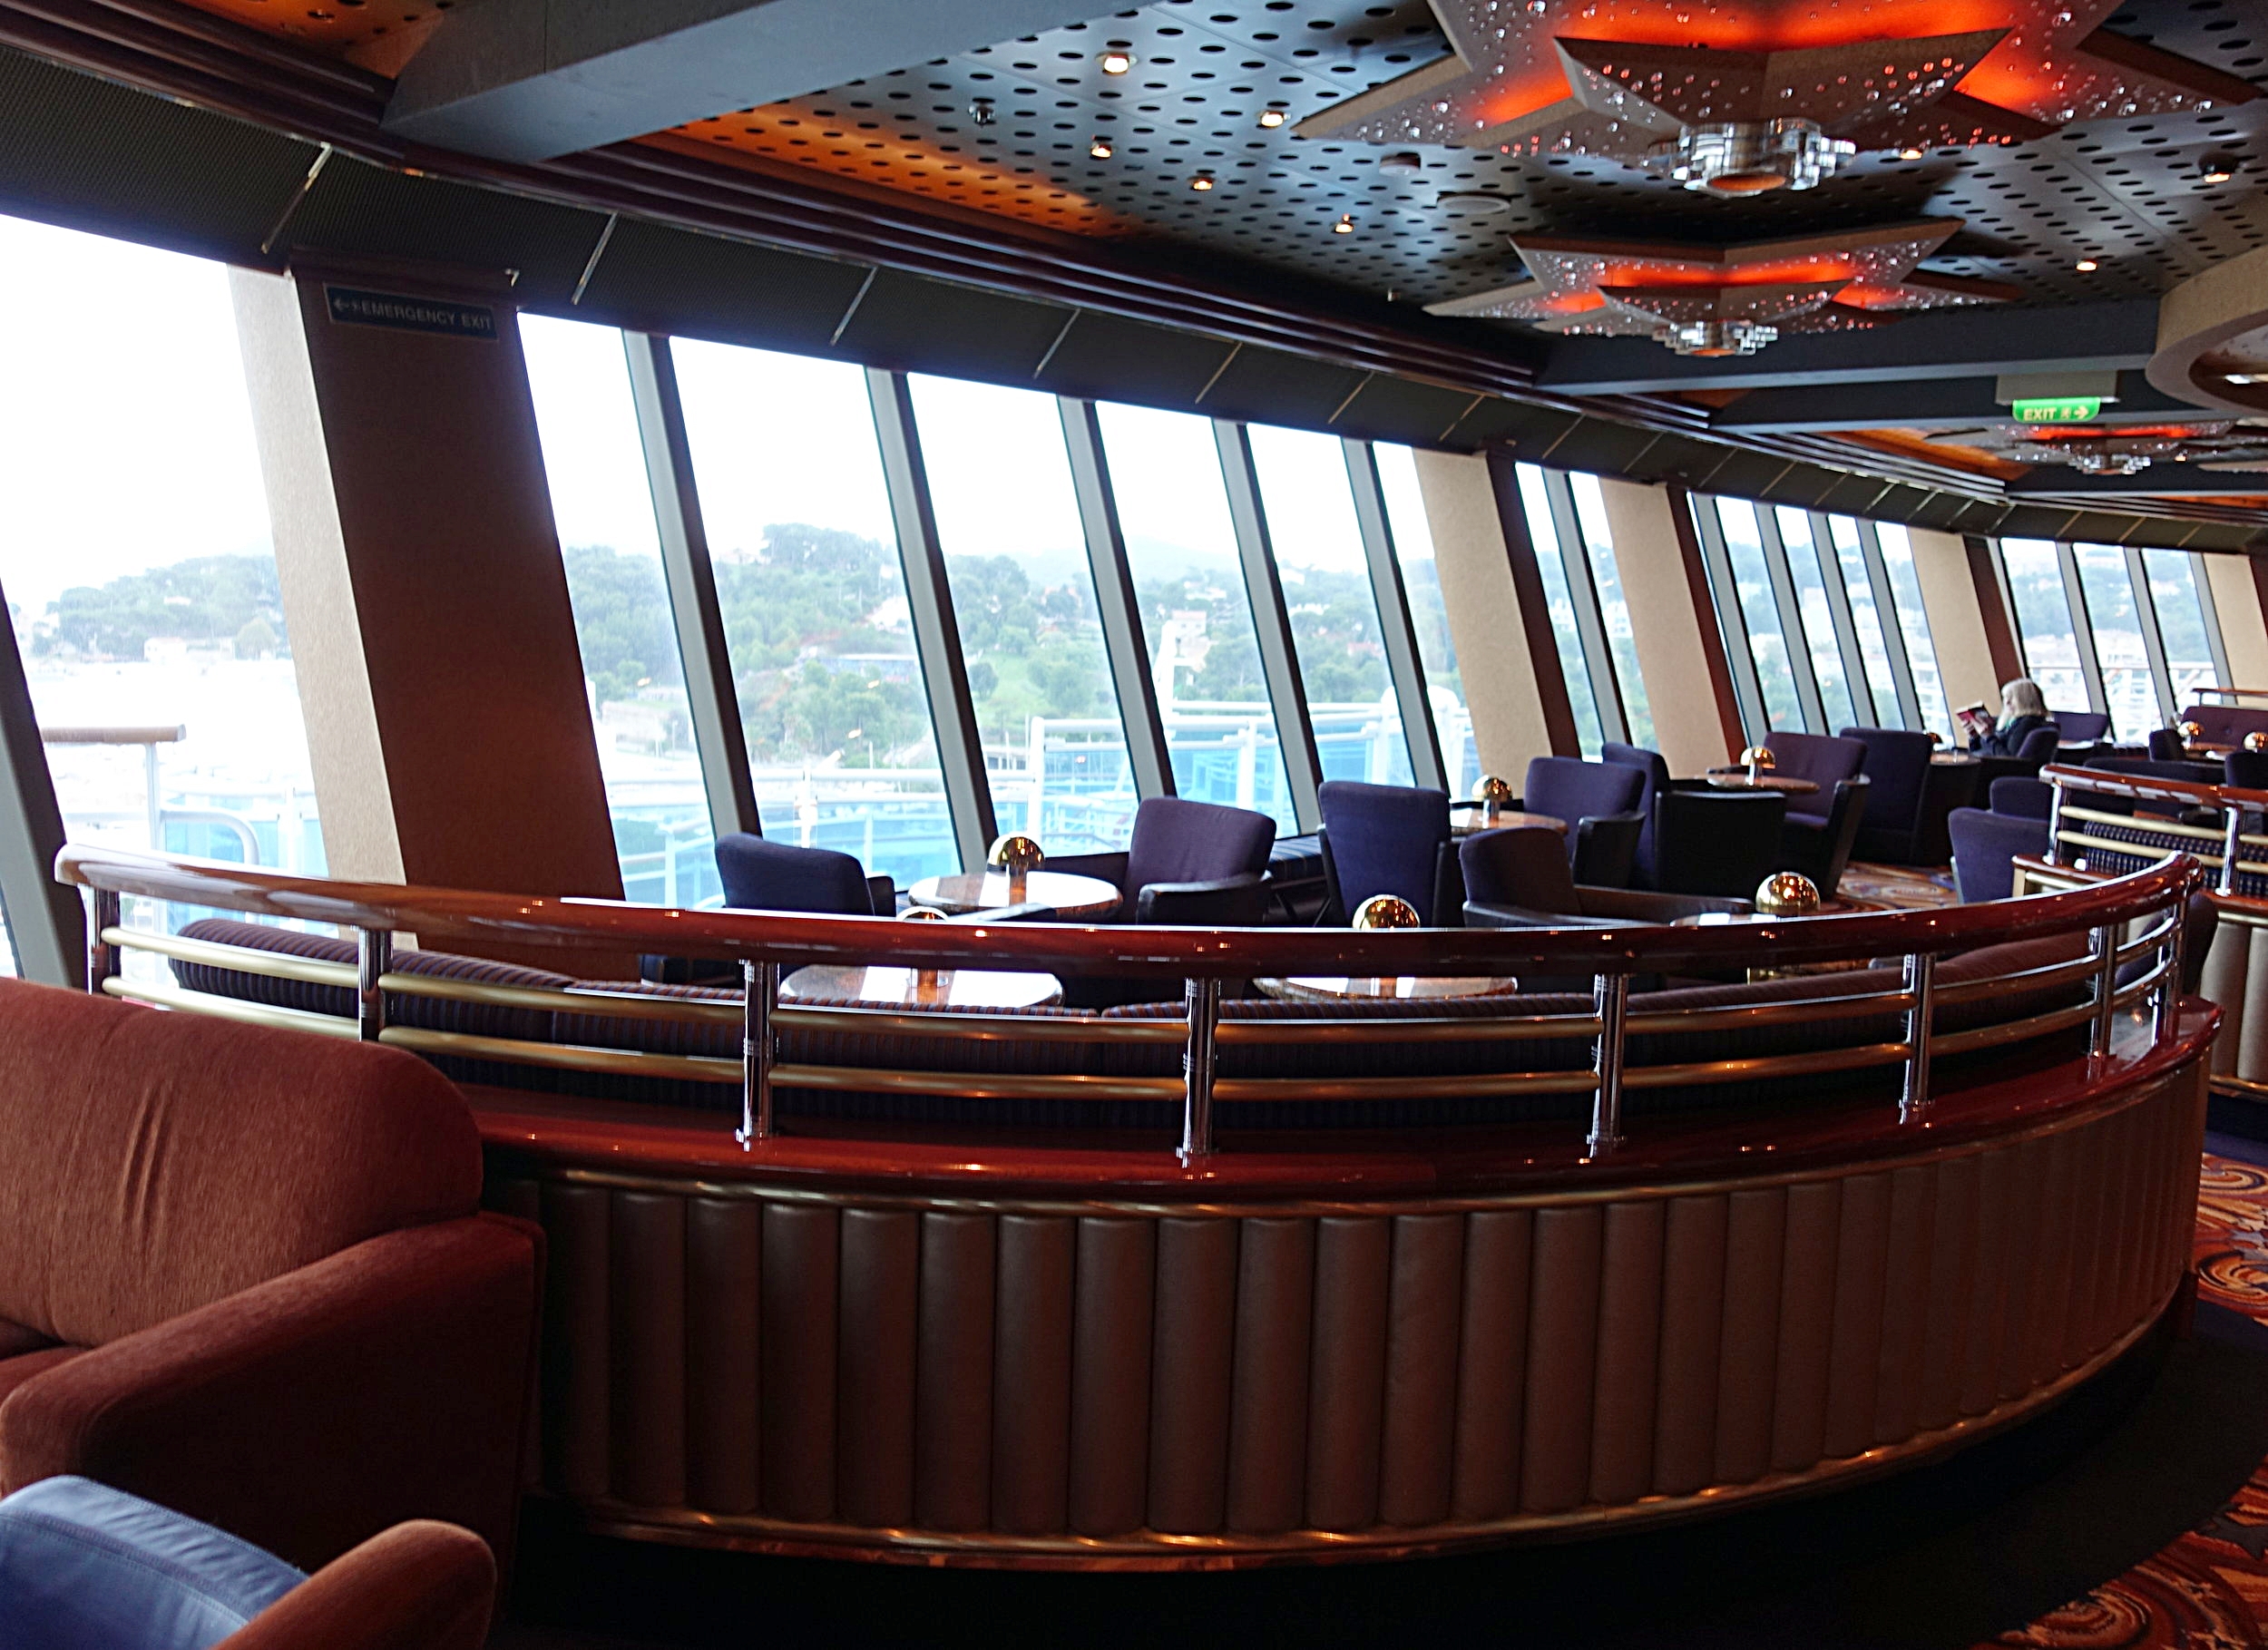  The panoramic aft windows in the Skywalker Lounge.  